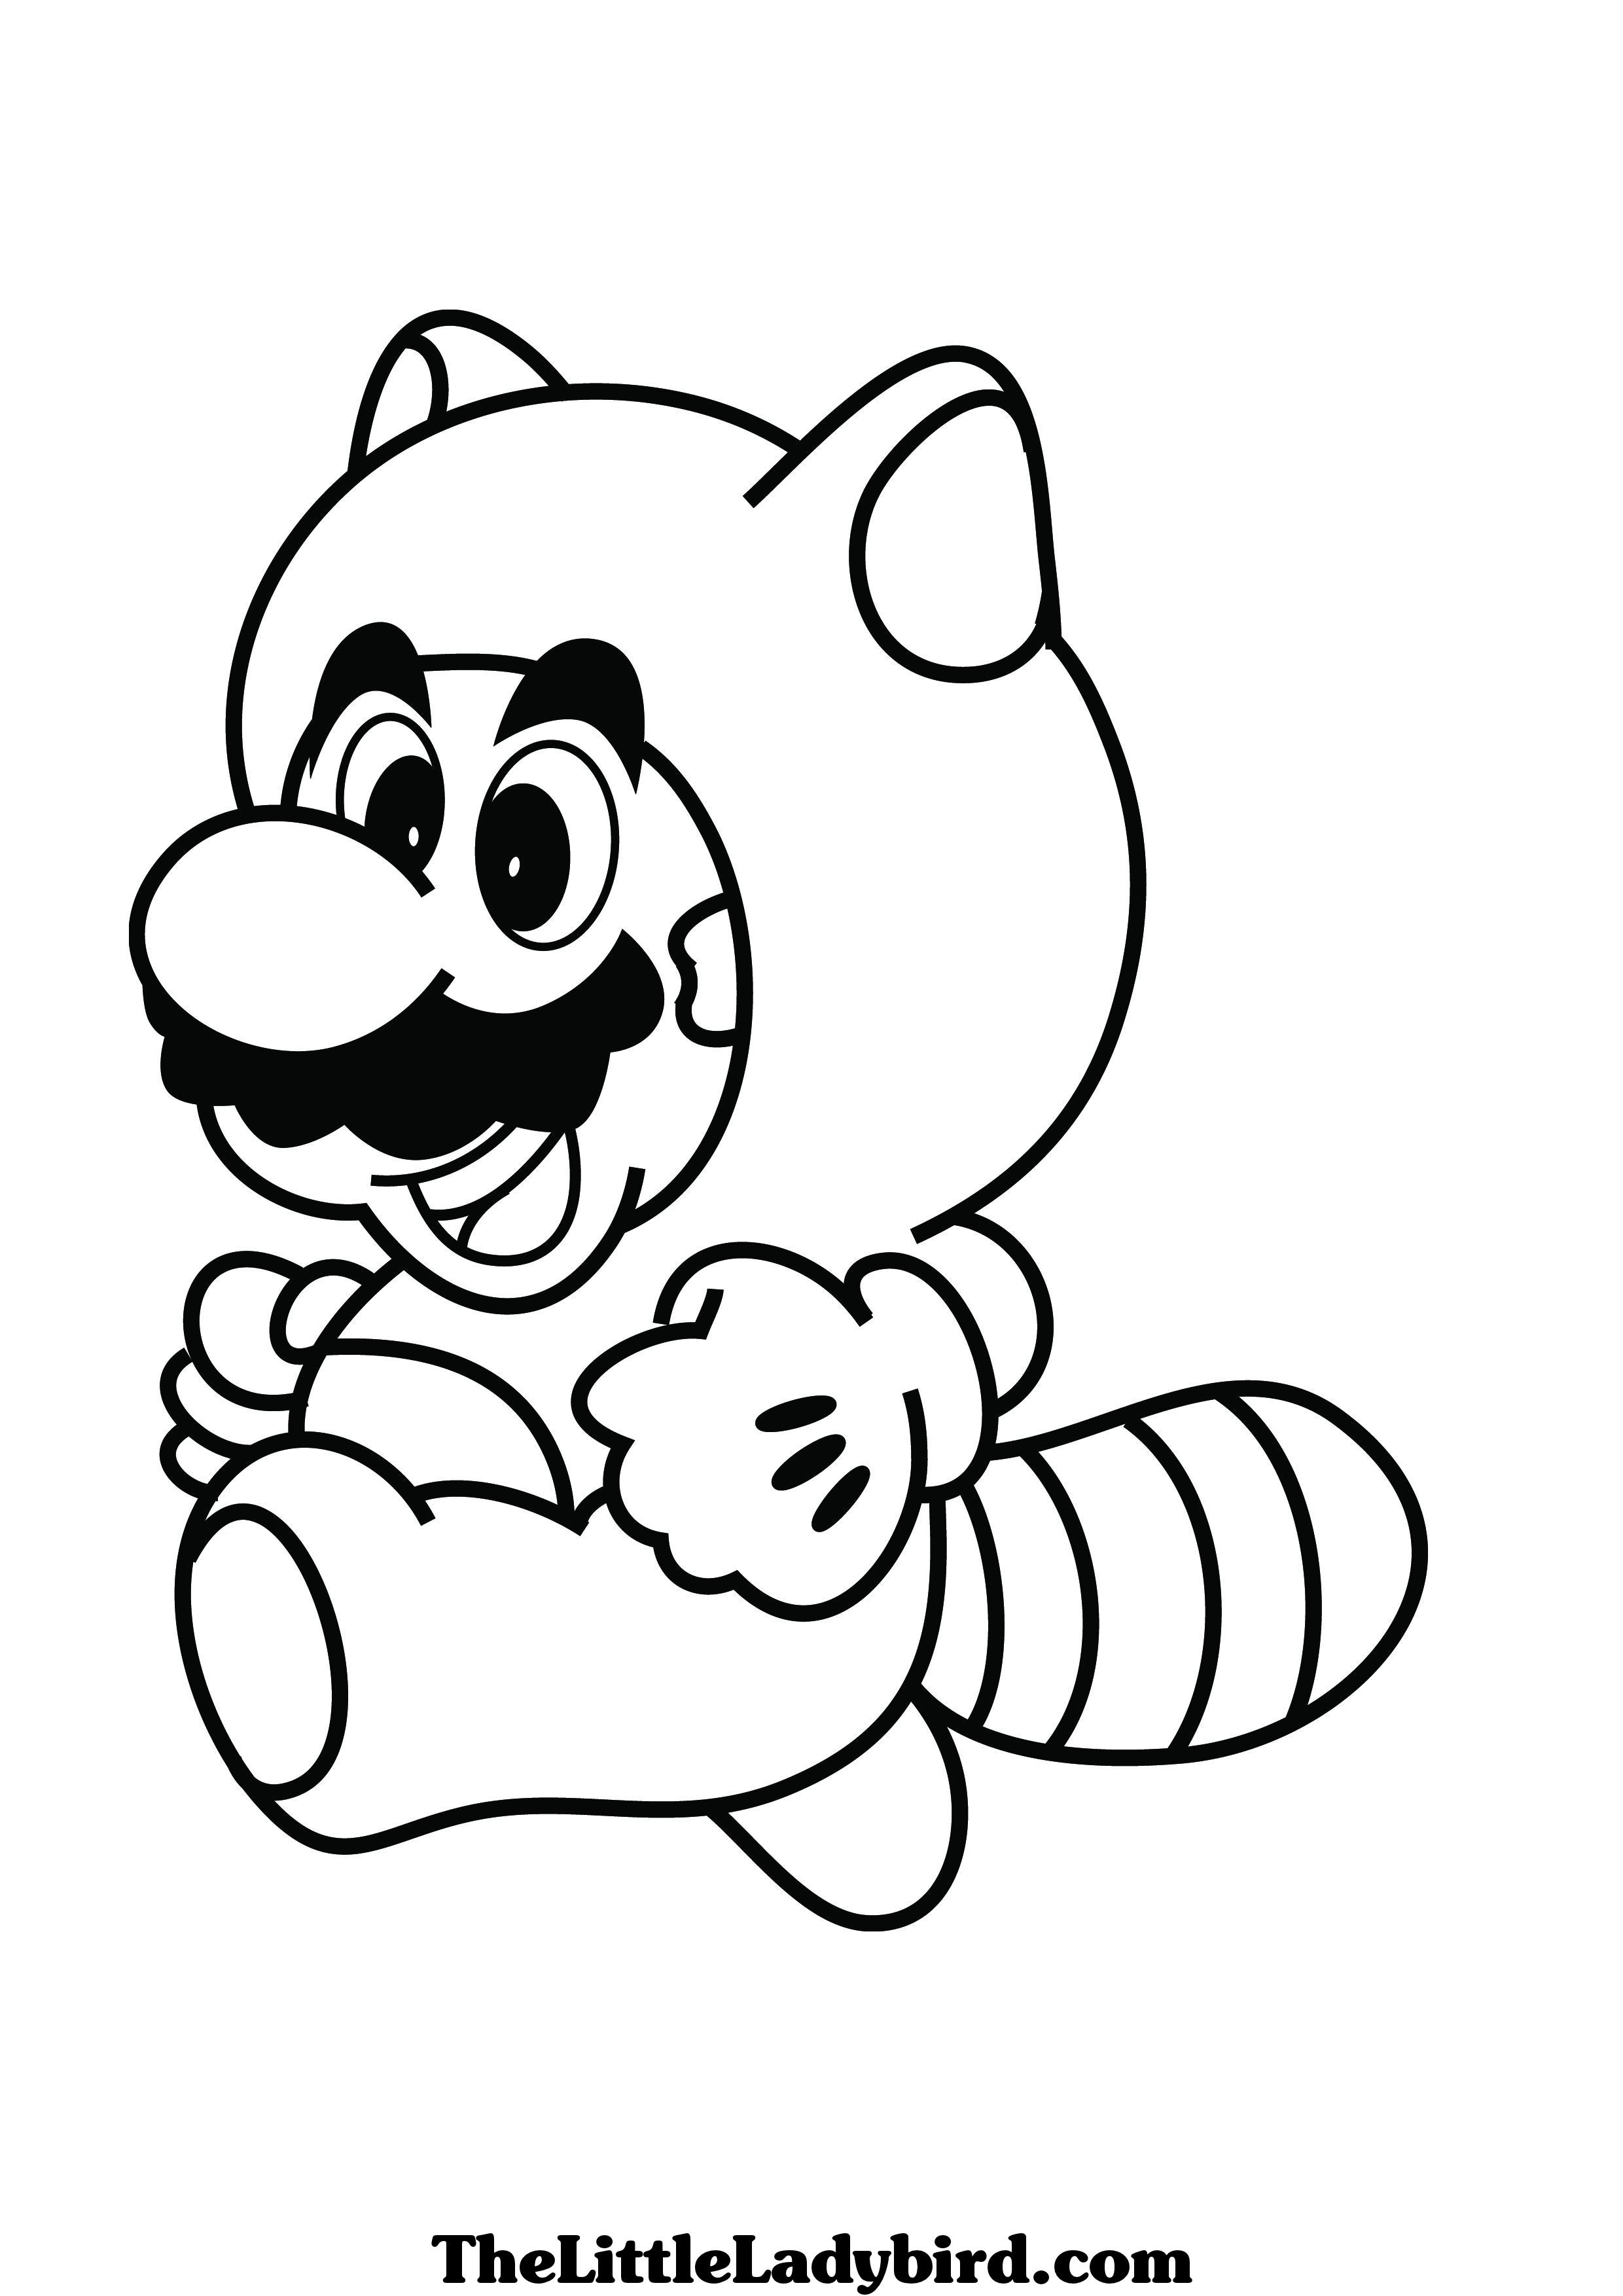 qubo coloring pages - photo #47